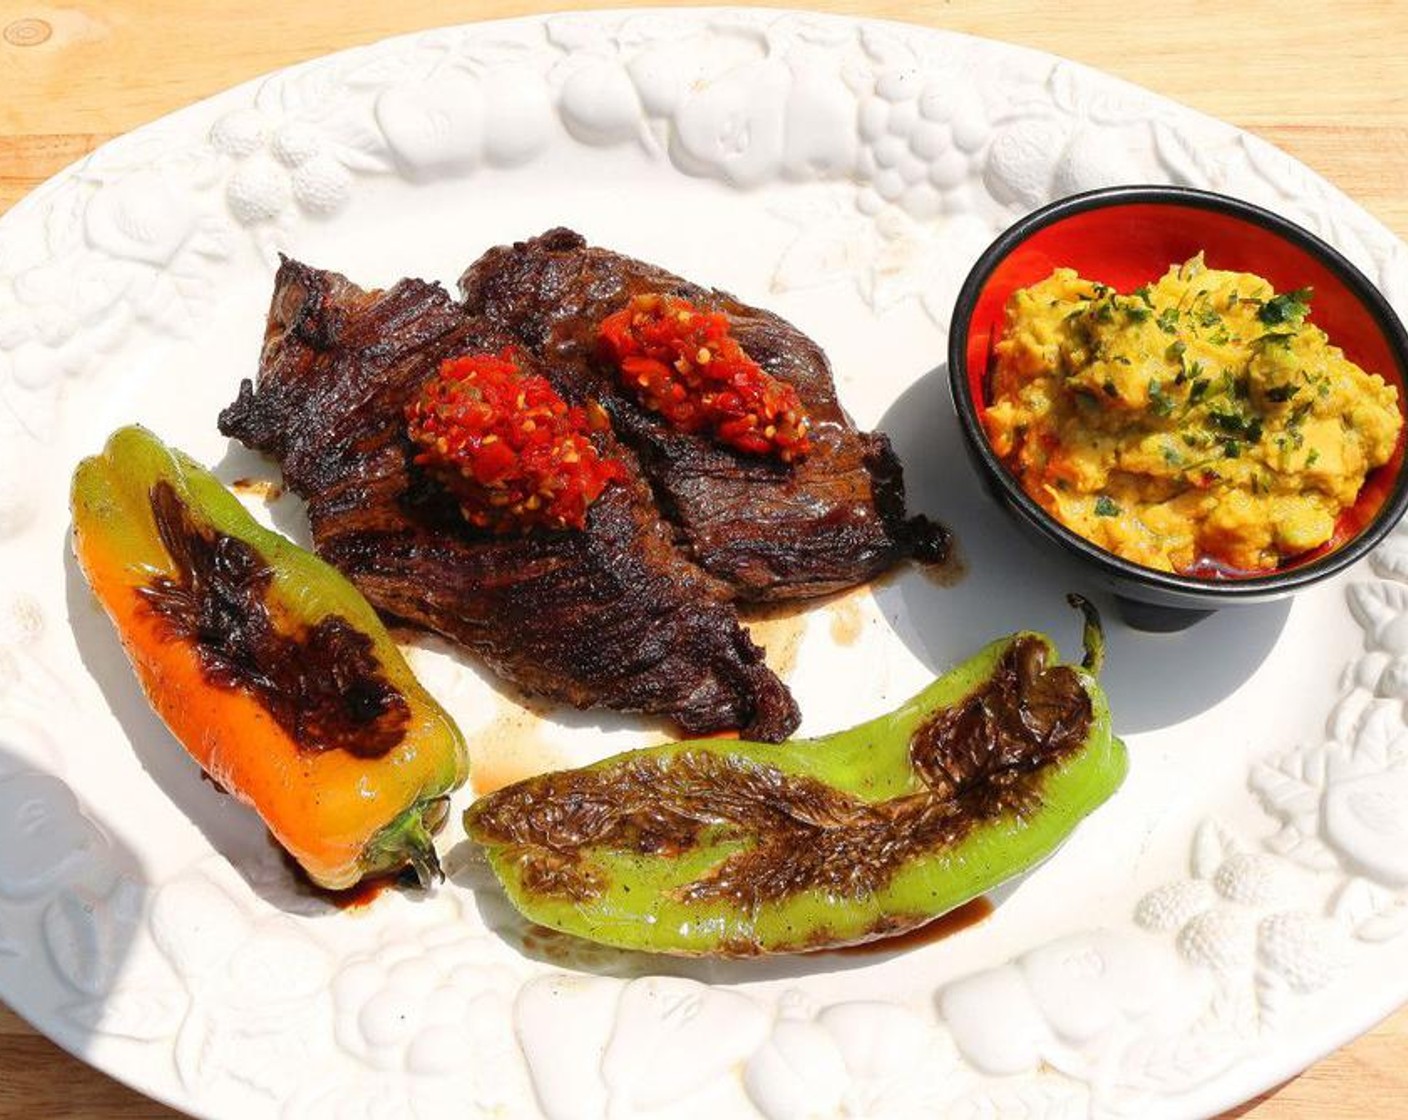 step 4 Saute steaks and peppers in Peanut Oil (2 Tbsp) until peppers are blistered and steaks are cooked according to your liking, serve with mashed avocados on the side, top the steaks with the Cherry Pepper Relish (to taste). Enjoy!